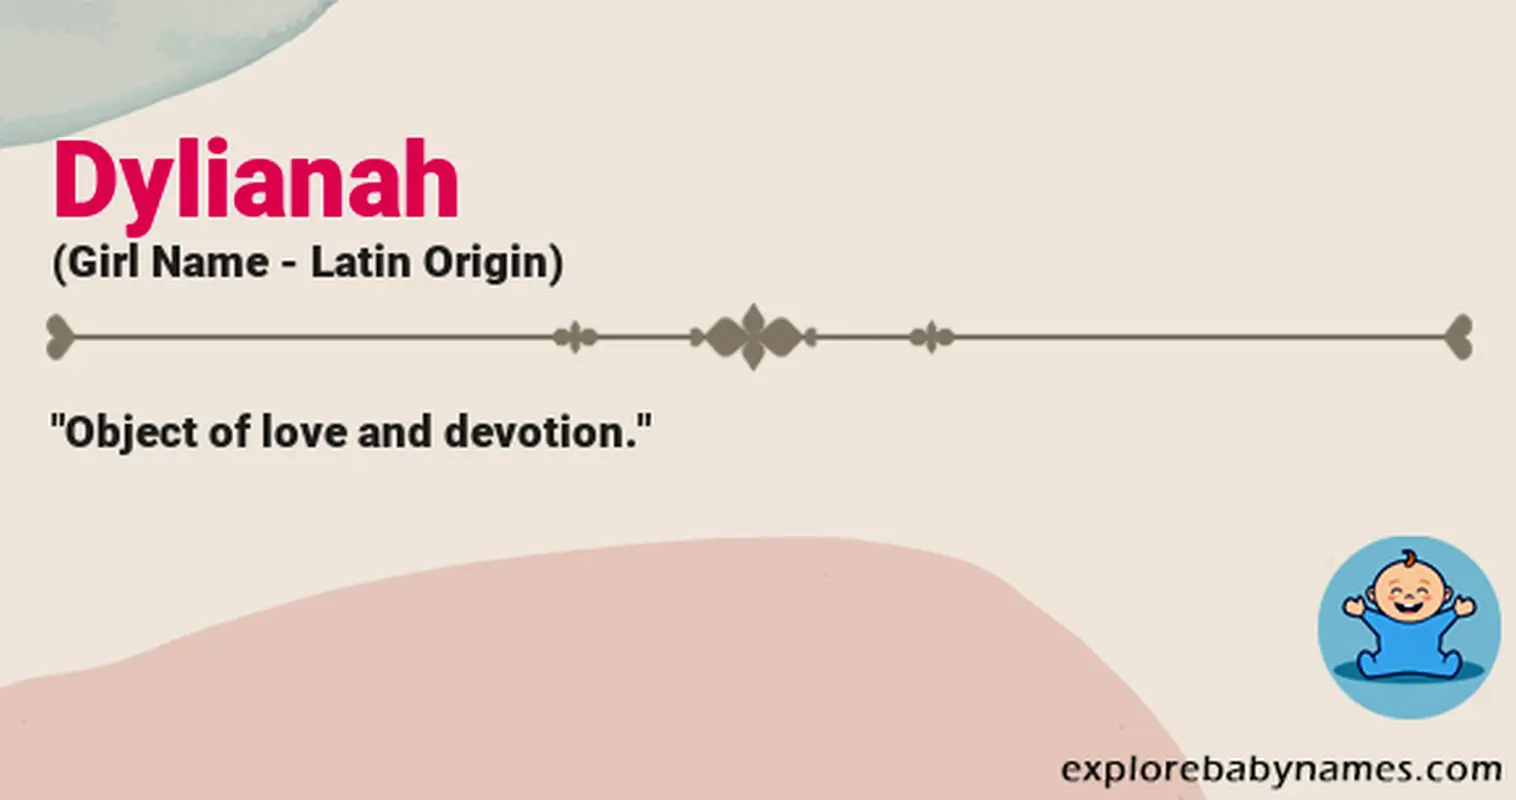 Meaning of Dylianah